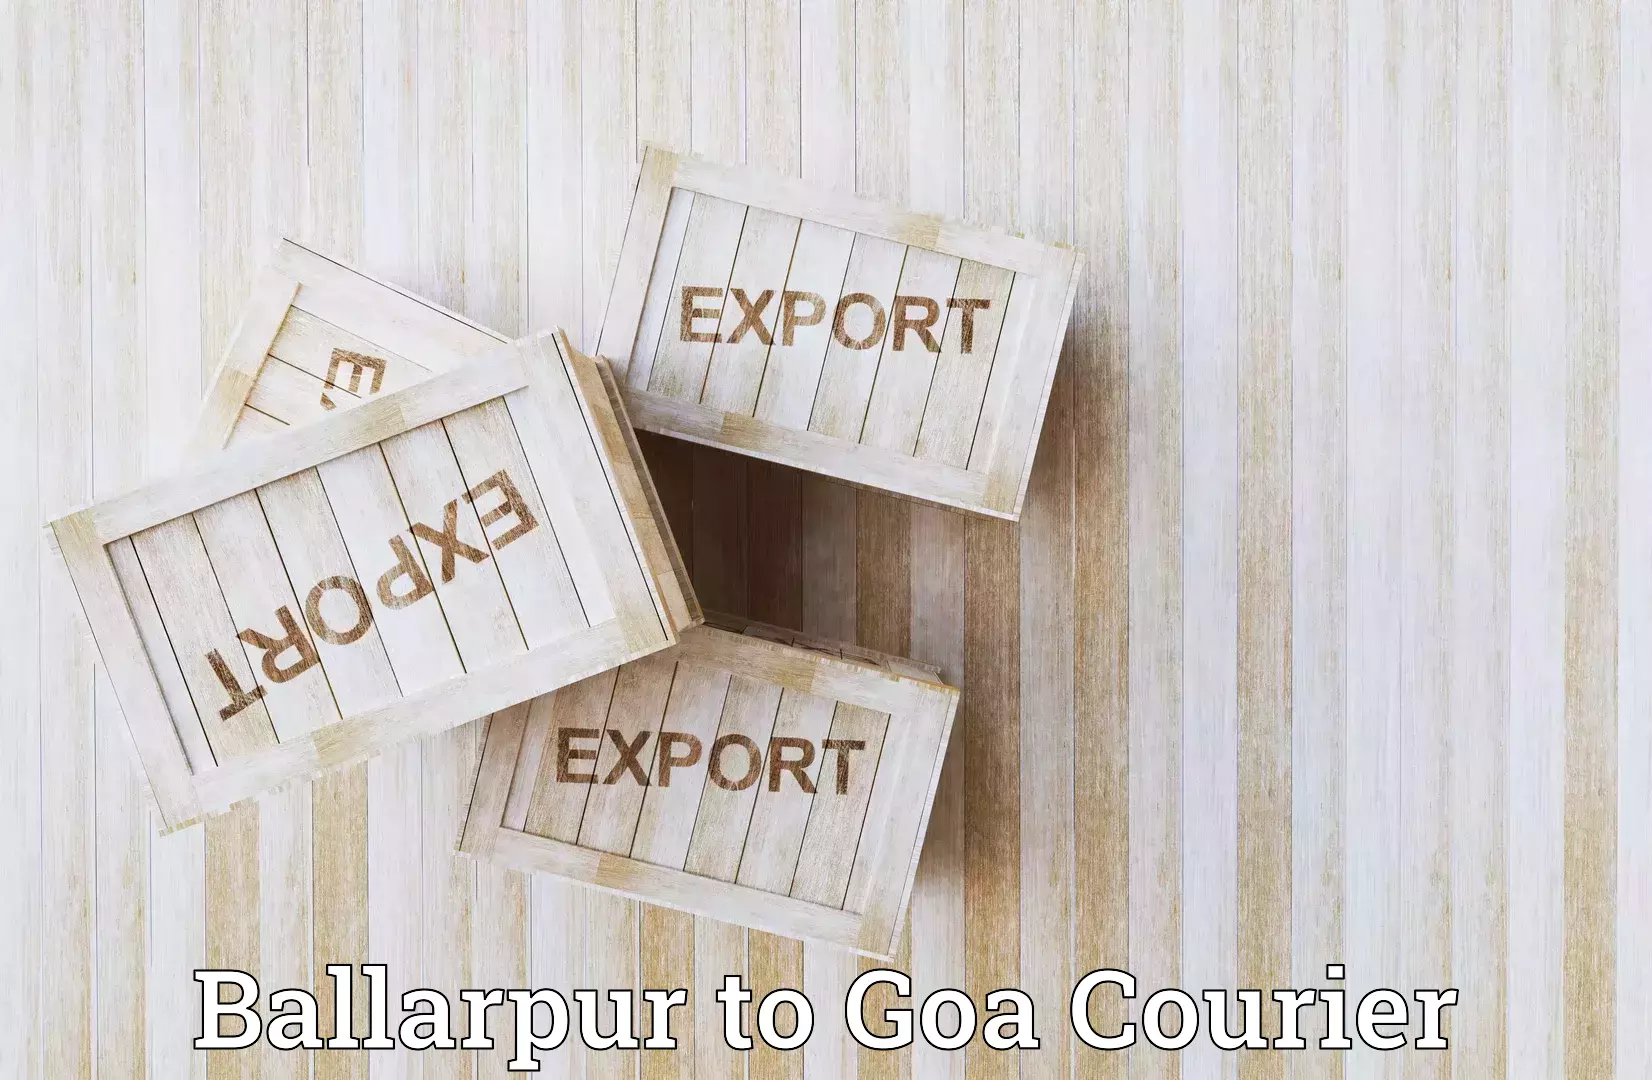 State-of-the-art courier technology Ballarpur to Panjim